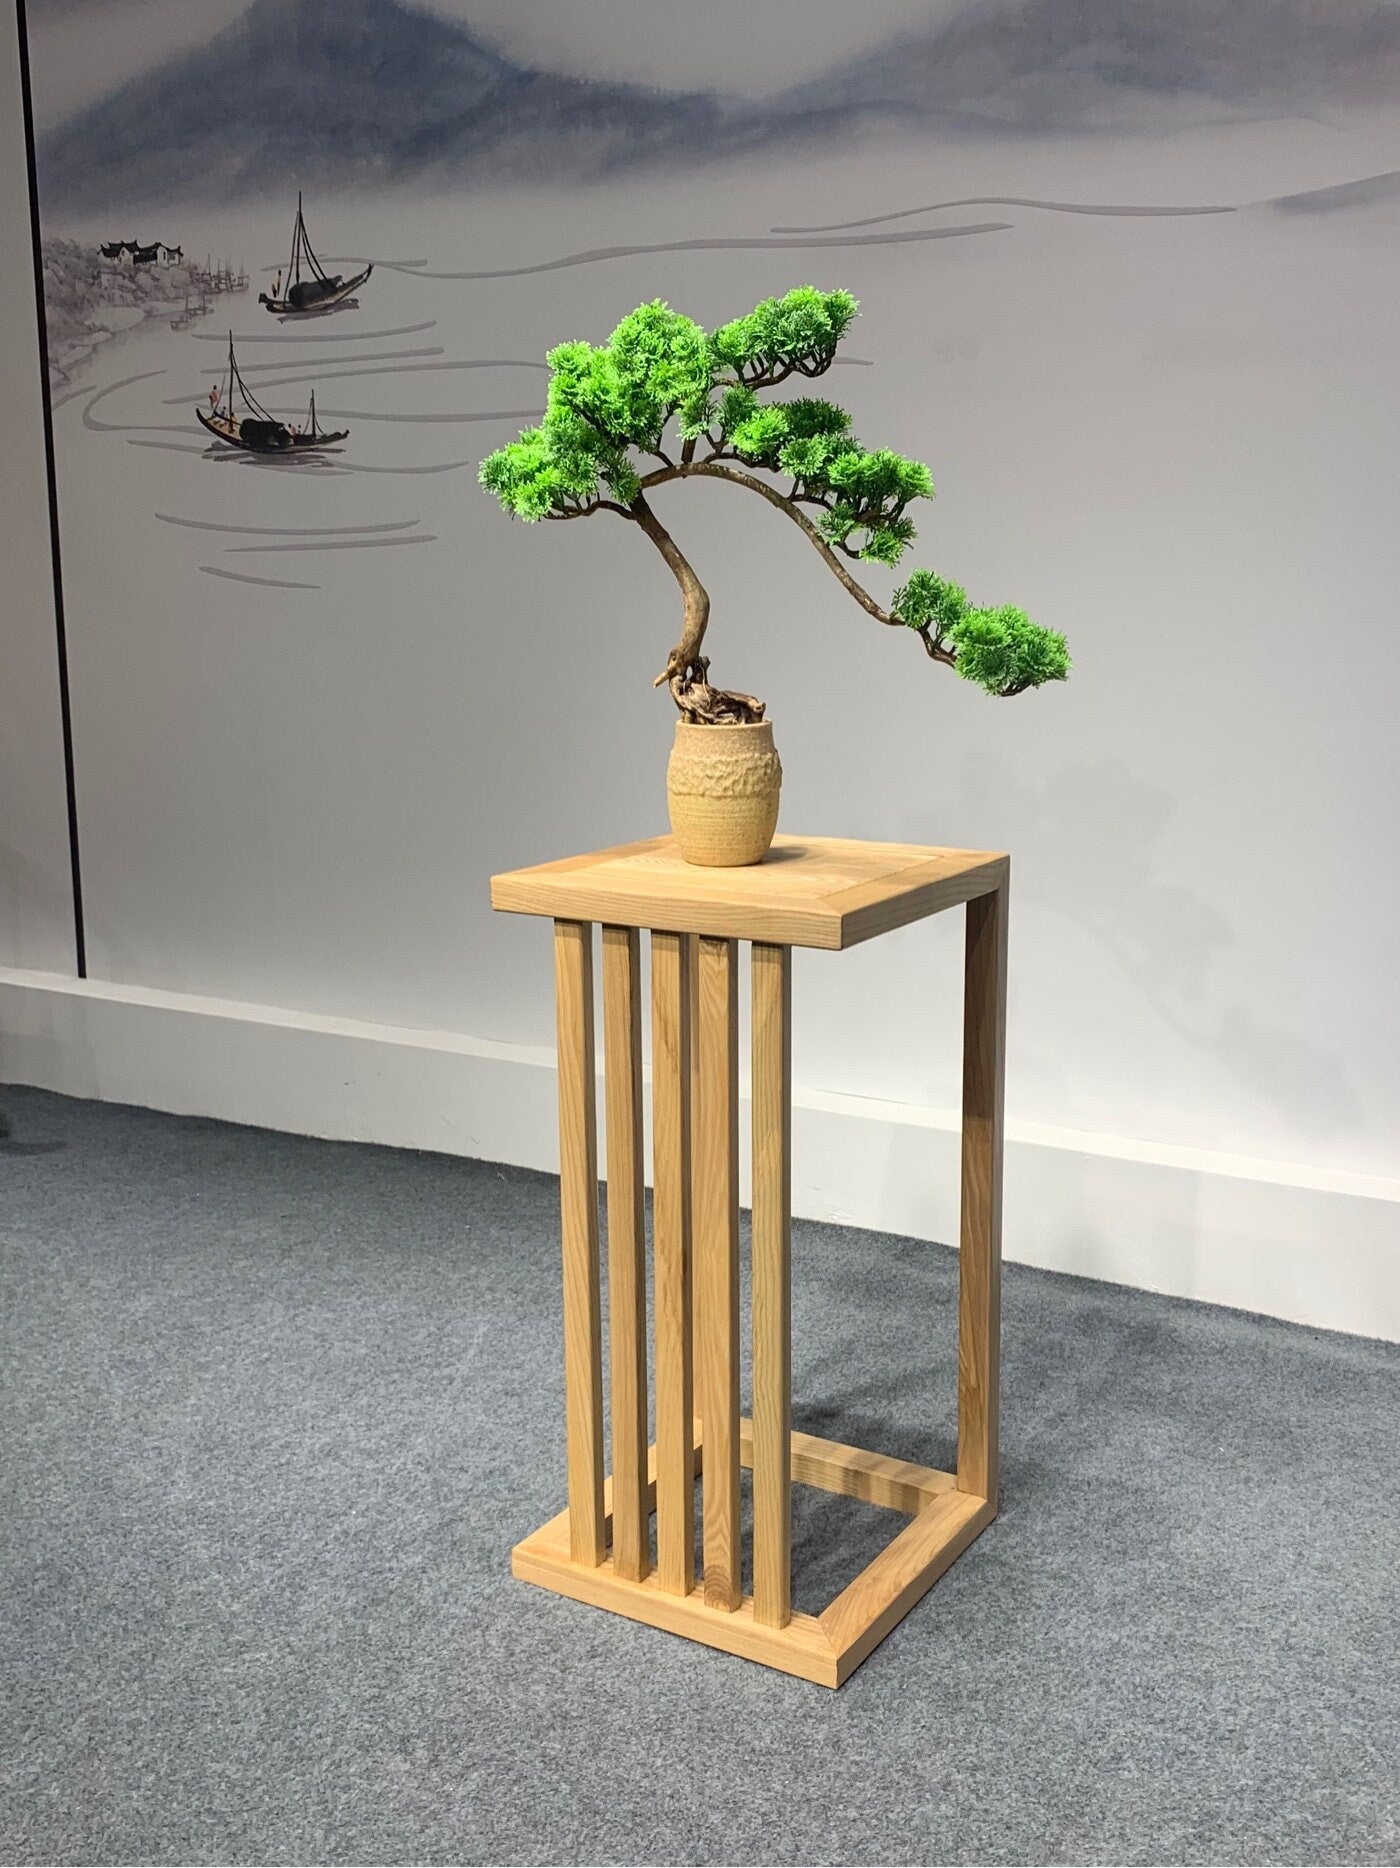 Compact plant Stand,white ash wood plant stand, can stain many color, Mid-Century Bamboo Pot Holder - SlabstudioHongKong